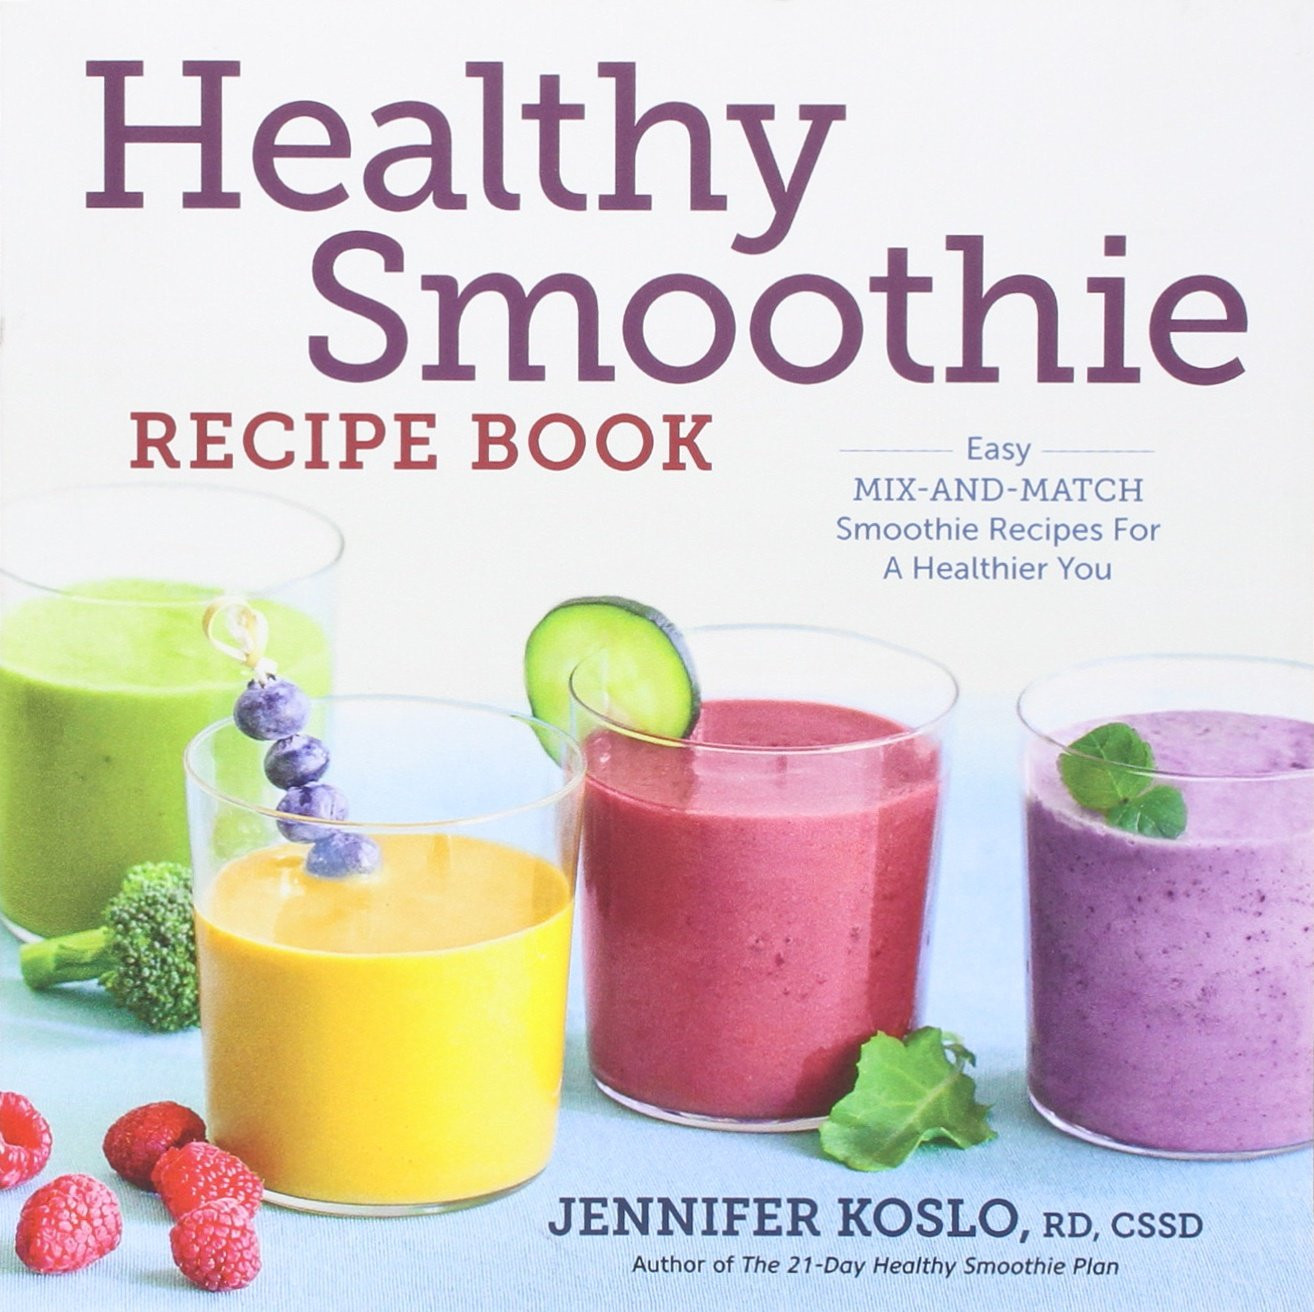 Healthy Fruit Smoothie Recipes
 Cheapest copy of Healthy Smoothie Recipe Book Easy Mix